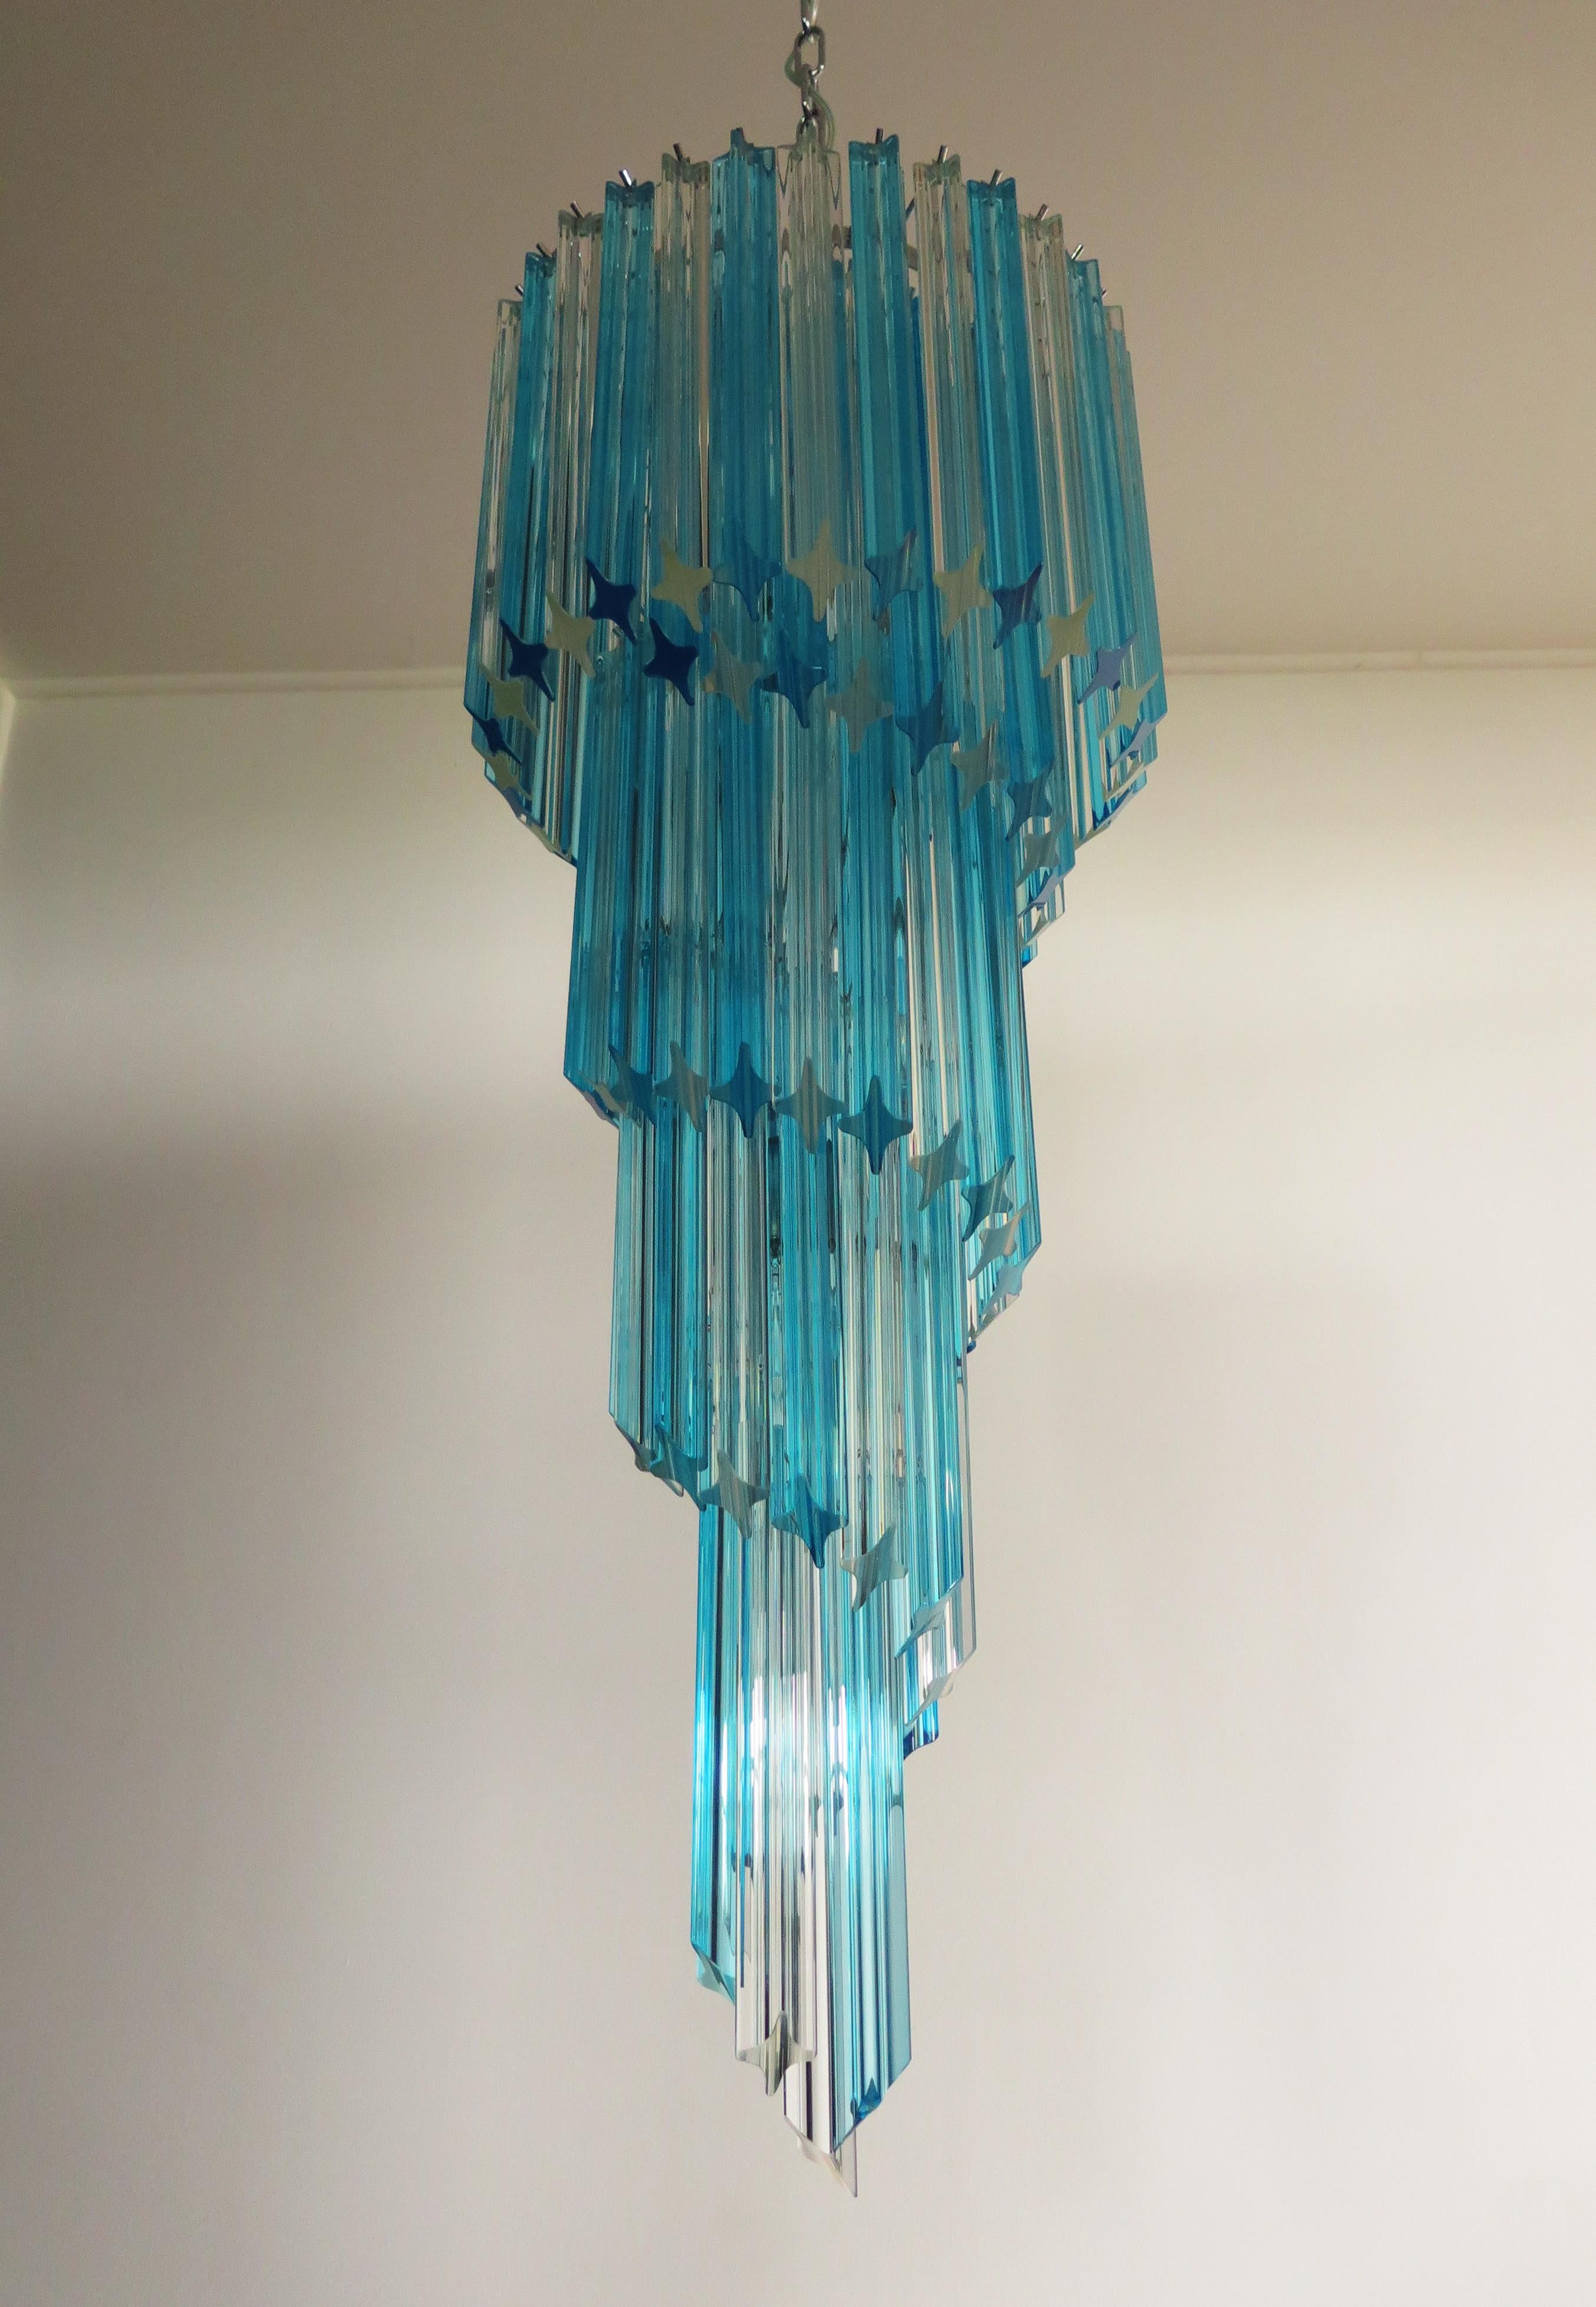 Fantastic vintage Murano chandelier made by 86 Murano crystal trasparent and blue prism in a nickel metal frame.The shape of this chandelier is spiral.
Period: late 20th century
Dimensions: 63 inches height (160 cm) with chain; 39.40 inches height